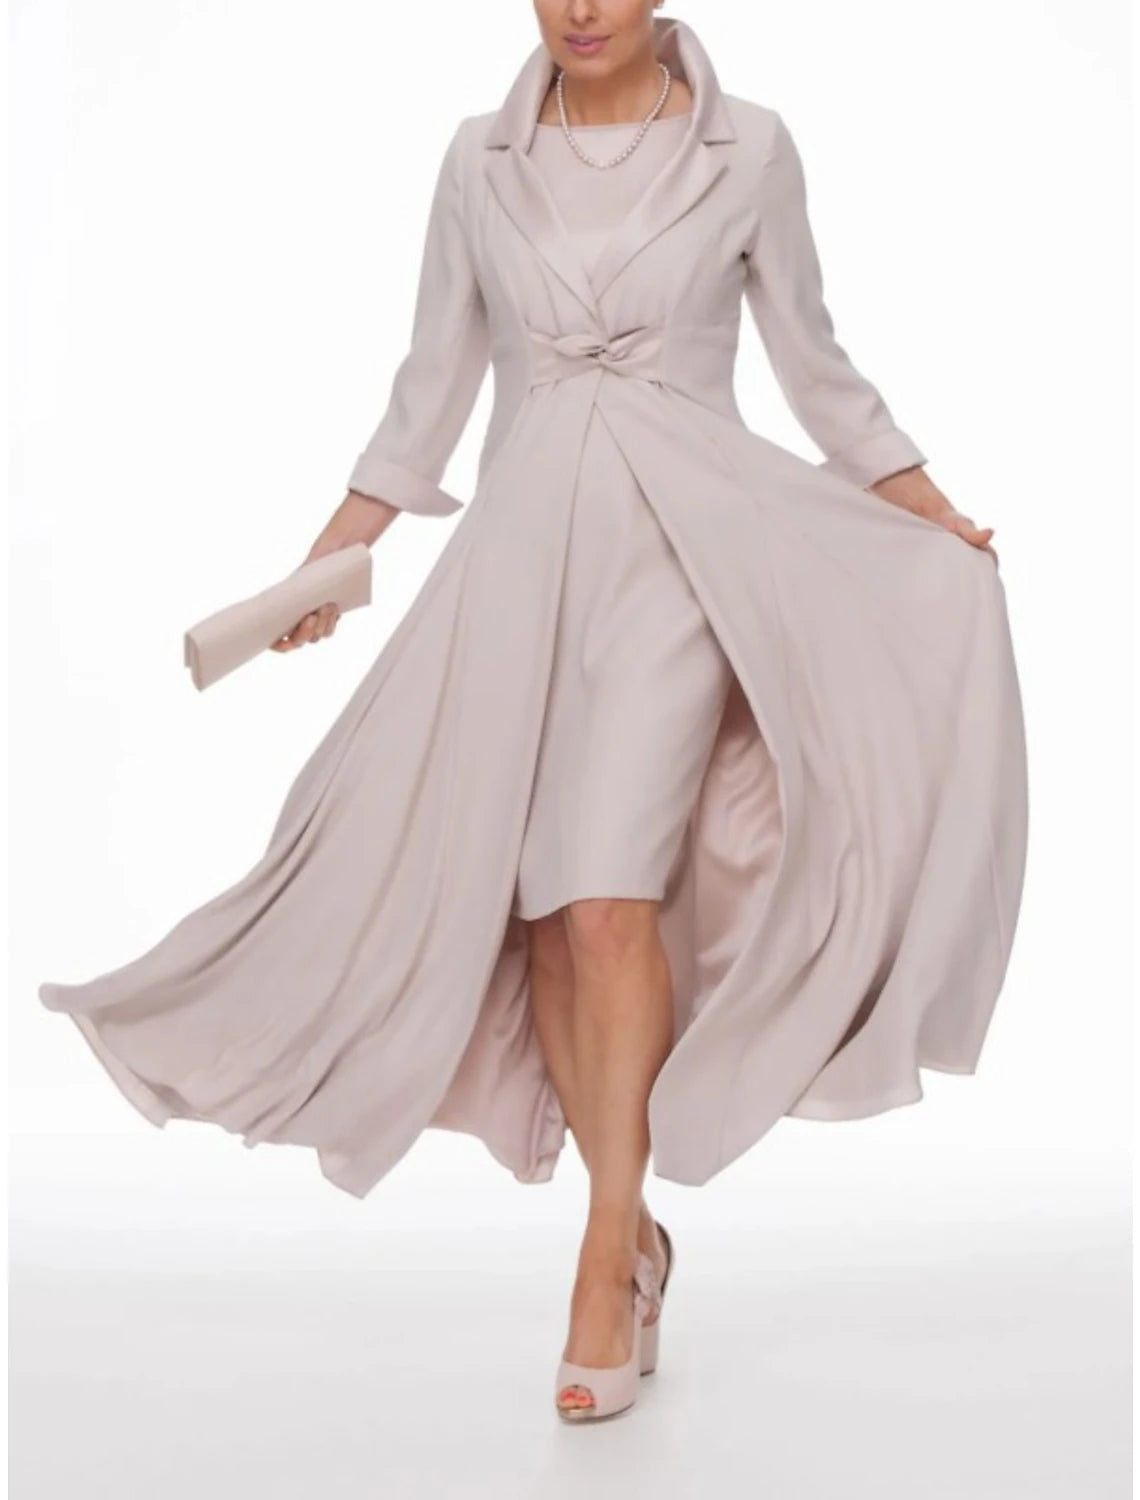 Two Piece Sheath / Column Mother of the Bride Dress Wedding Guest Party Elegant Winter With Jacket 3/4 Sleeve Shirt Collar Ankle Length Chiffon Pleats Solid Color